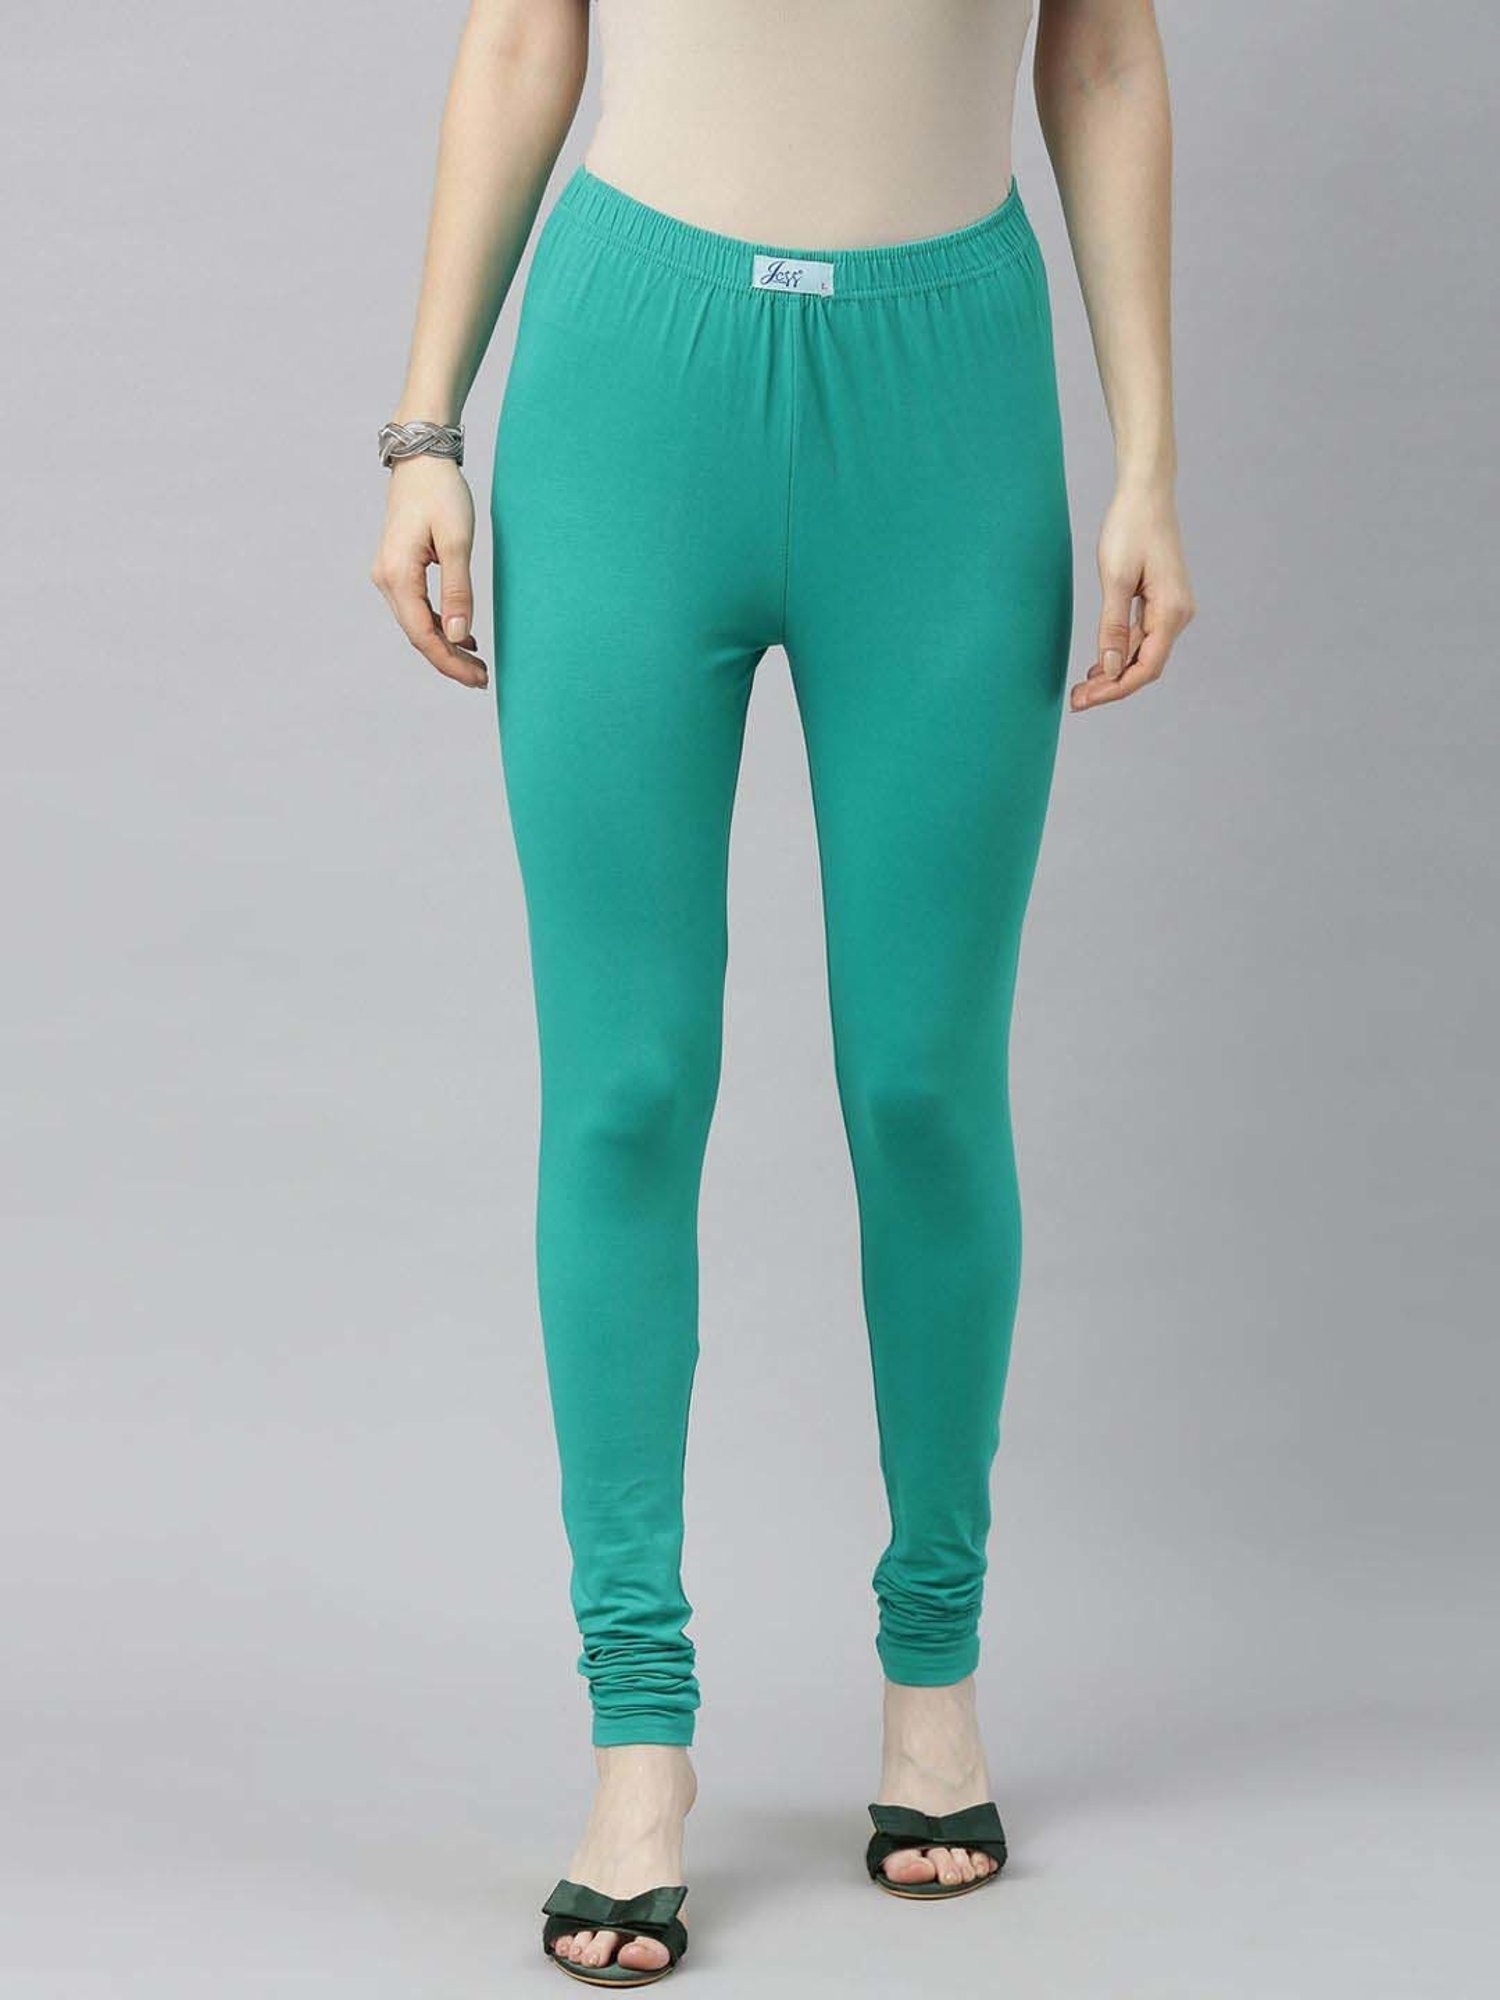 Buy INDIAN FLOWER Women Lycra Churidar legging Turquoise color Online at  Low Prices in India - Paytmmall.com